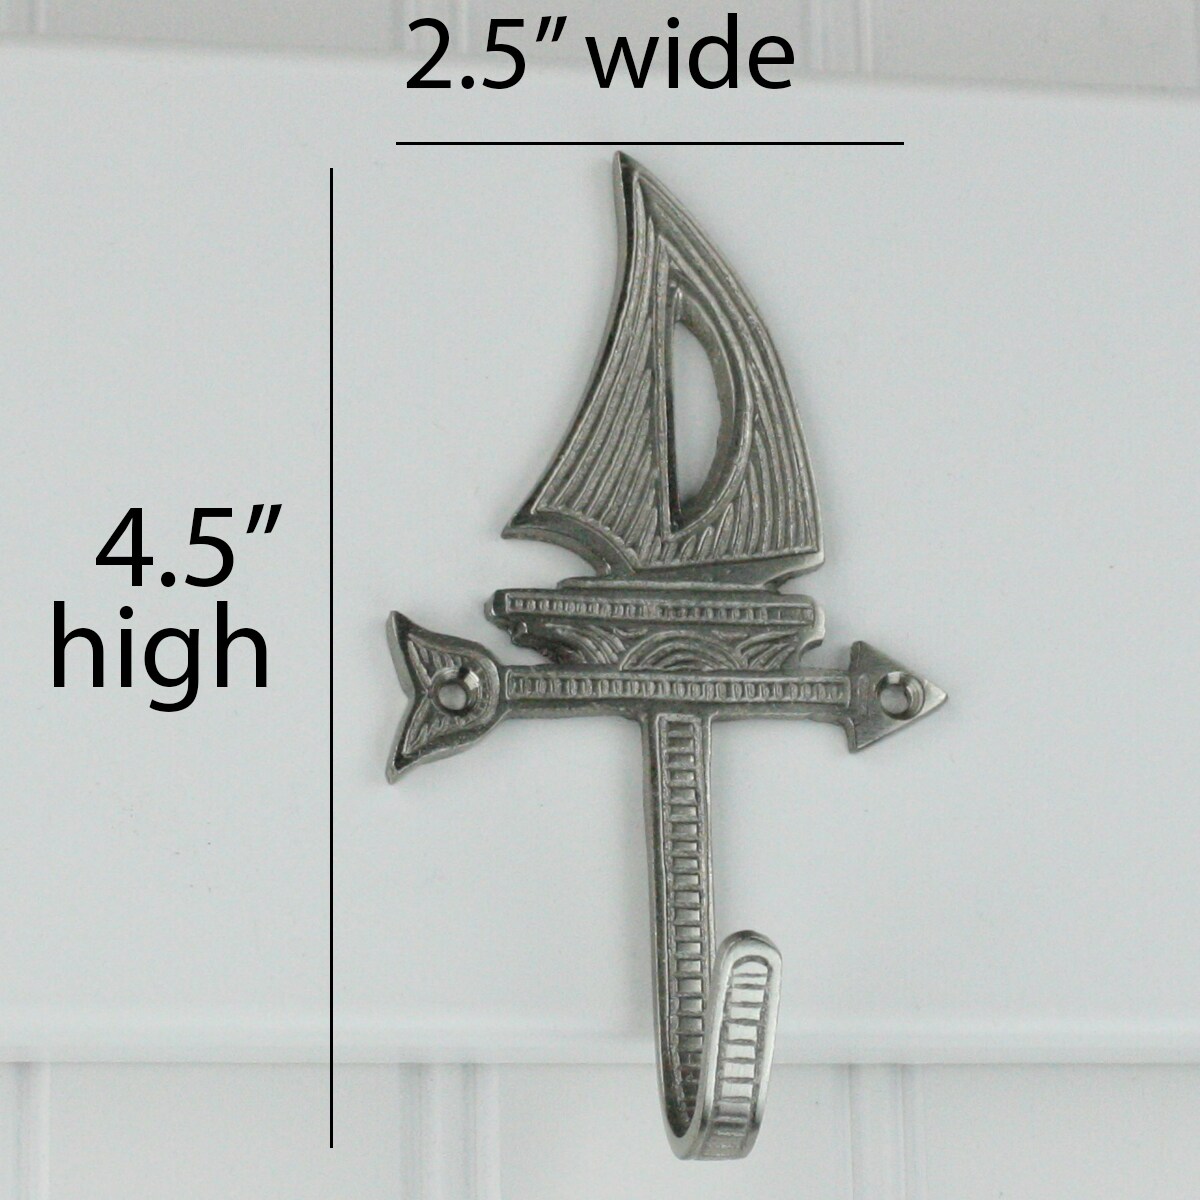 https://ak1.ostkcdn.com/images/products/10102077/Highpoint-Collection-Satin-Nickel-Plated-Sailboat-Wall-Hooks-Set-of-4-4368fb0b-9774-42c3-981f-fa82485bd398.jpg